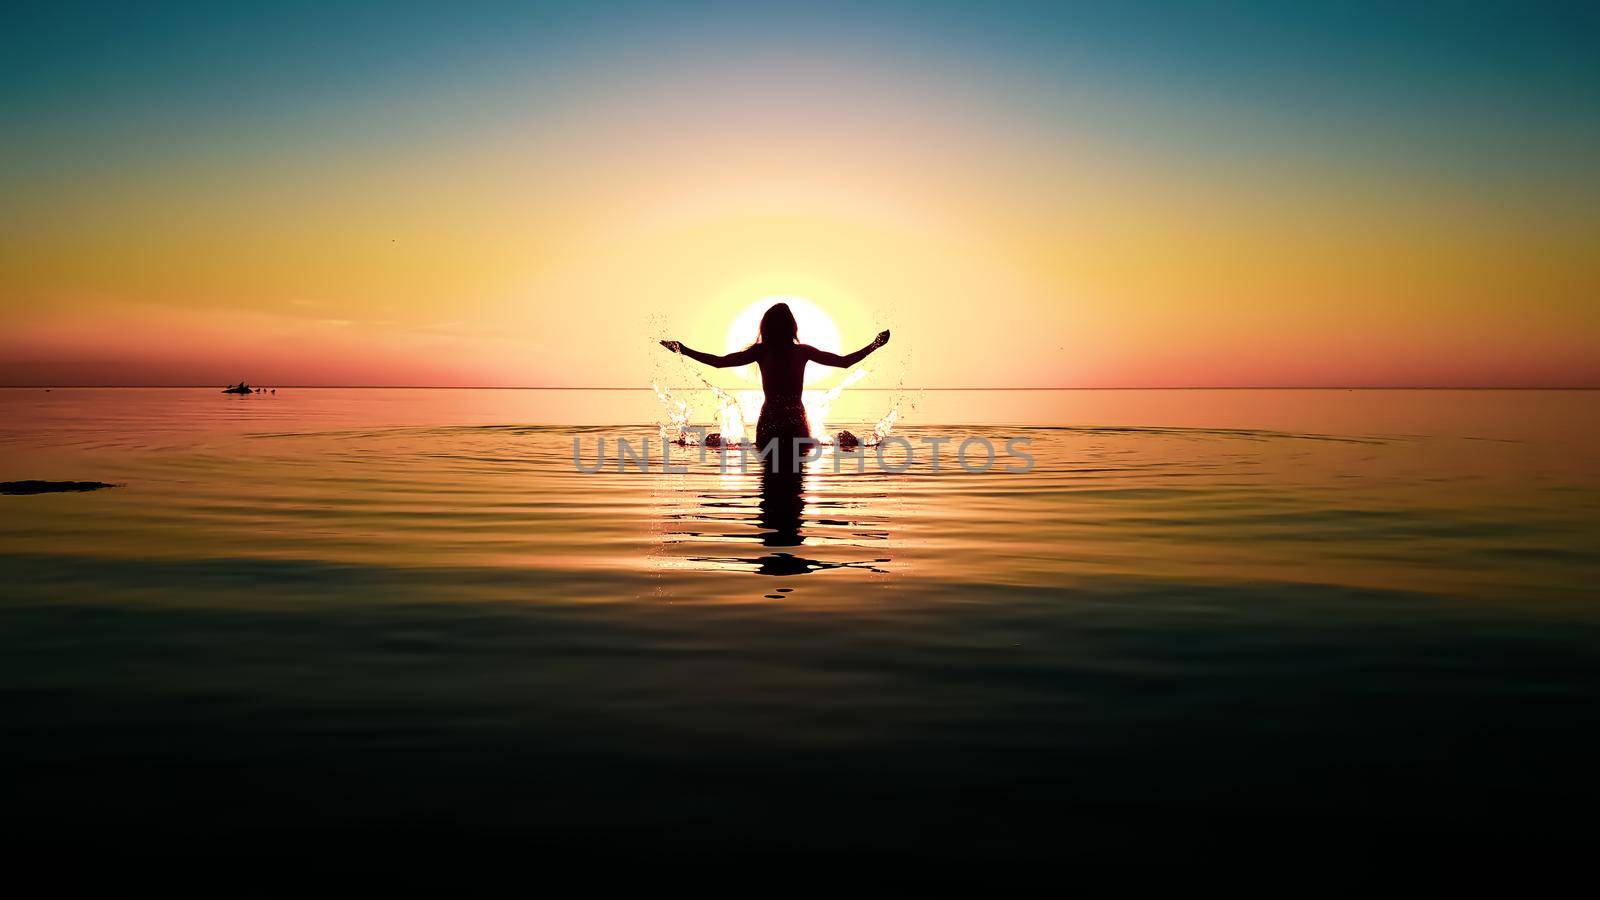 silhouette of a girl with raised hands in the water against the background of the sun disk during a colored sunset by zakob337